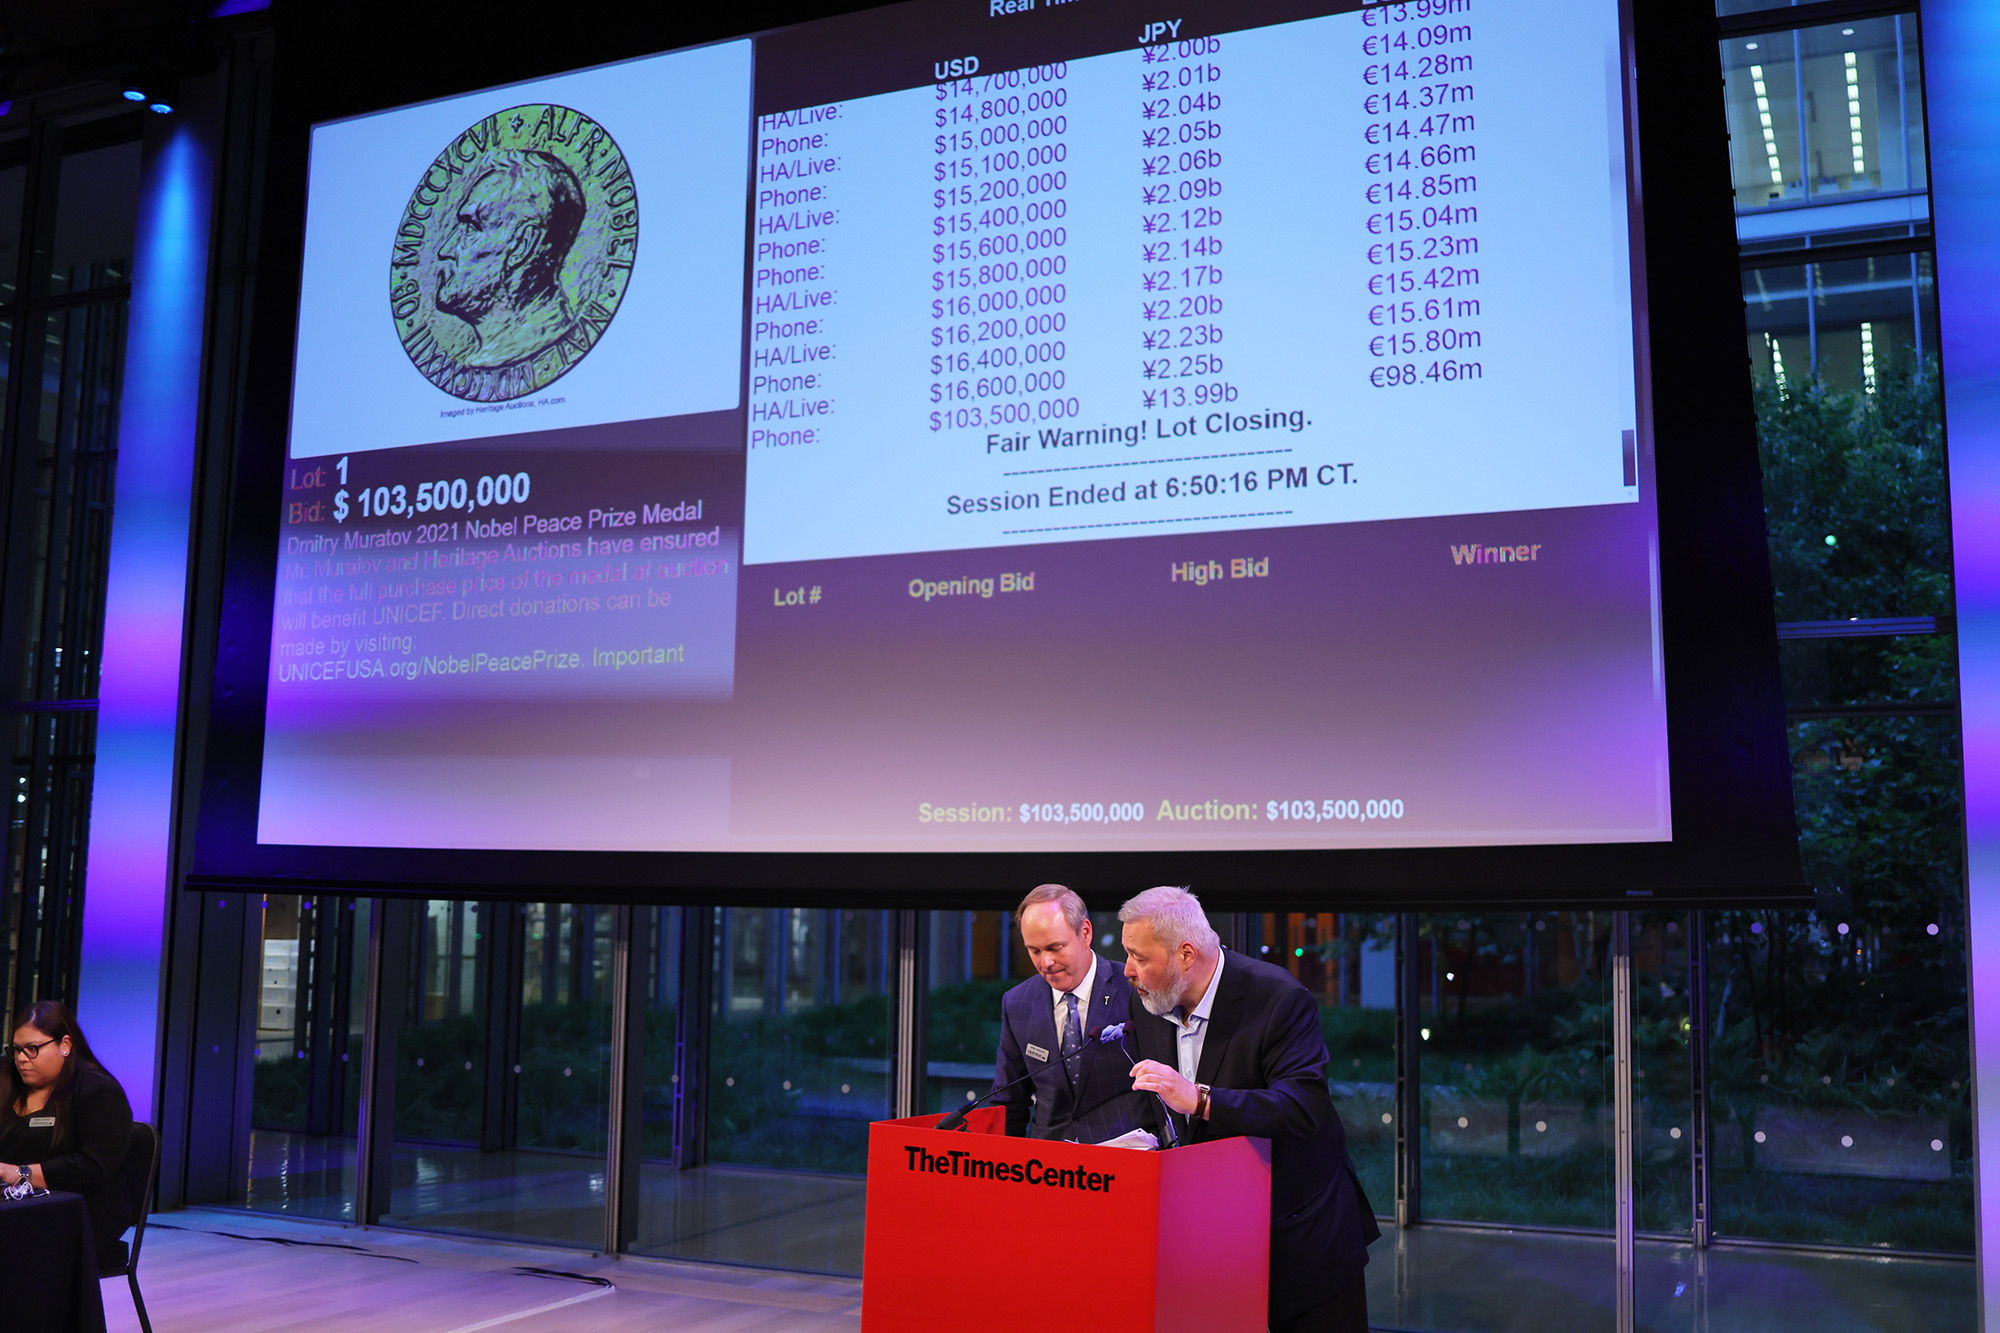 Nobel Peace Prize winner Dmitry Muratov, editor-in-chief of the Russian newspaper Novaya Gazeta, gives a short speech after the conclusion of bidding during a charity auction at The Times Center on June 20, in New York City. 